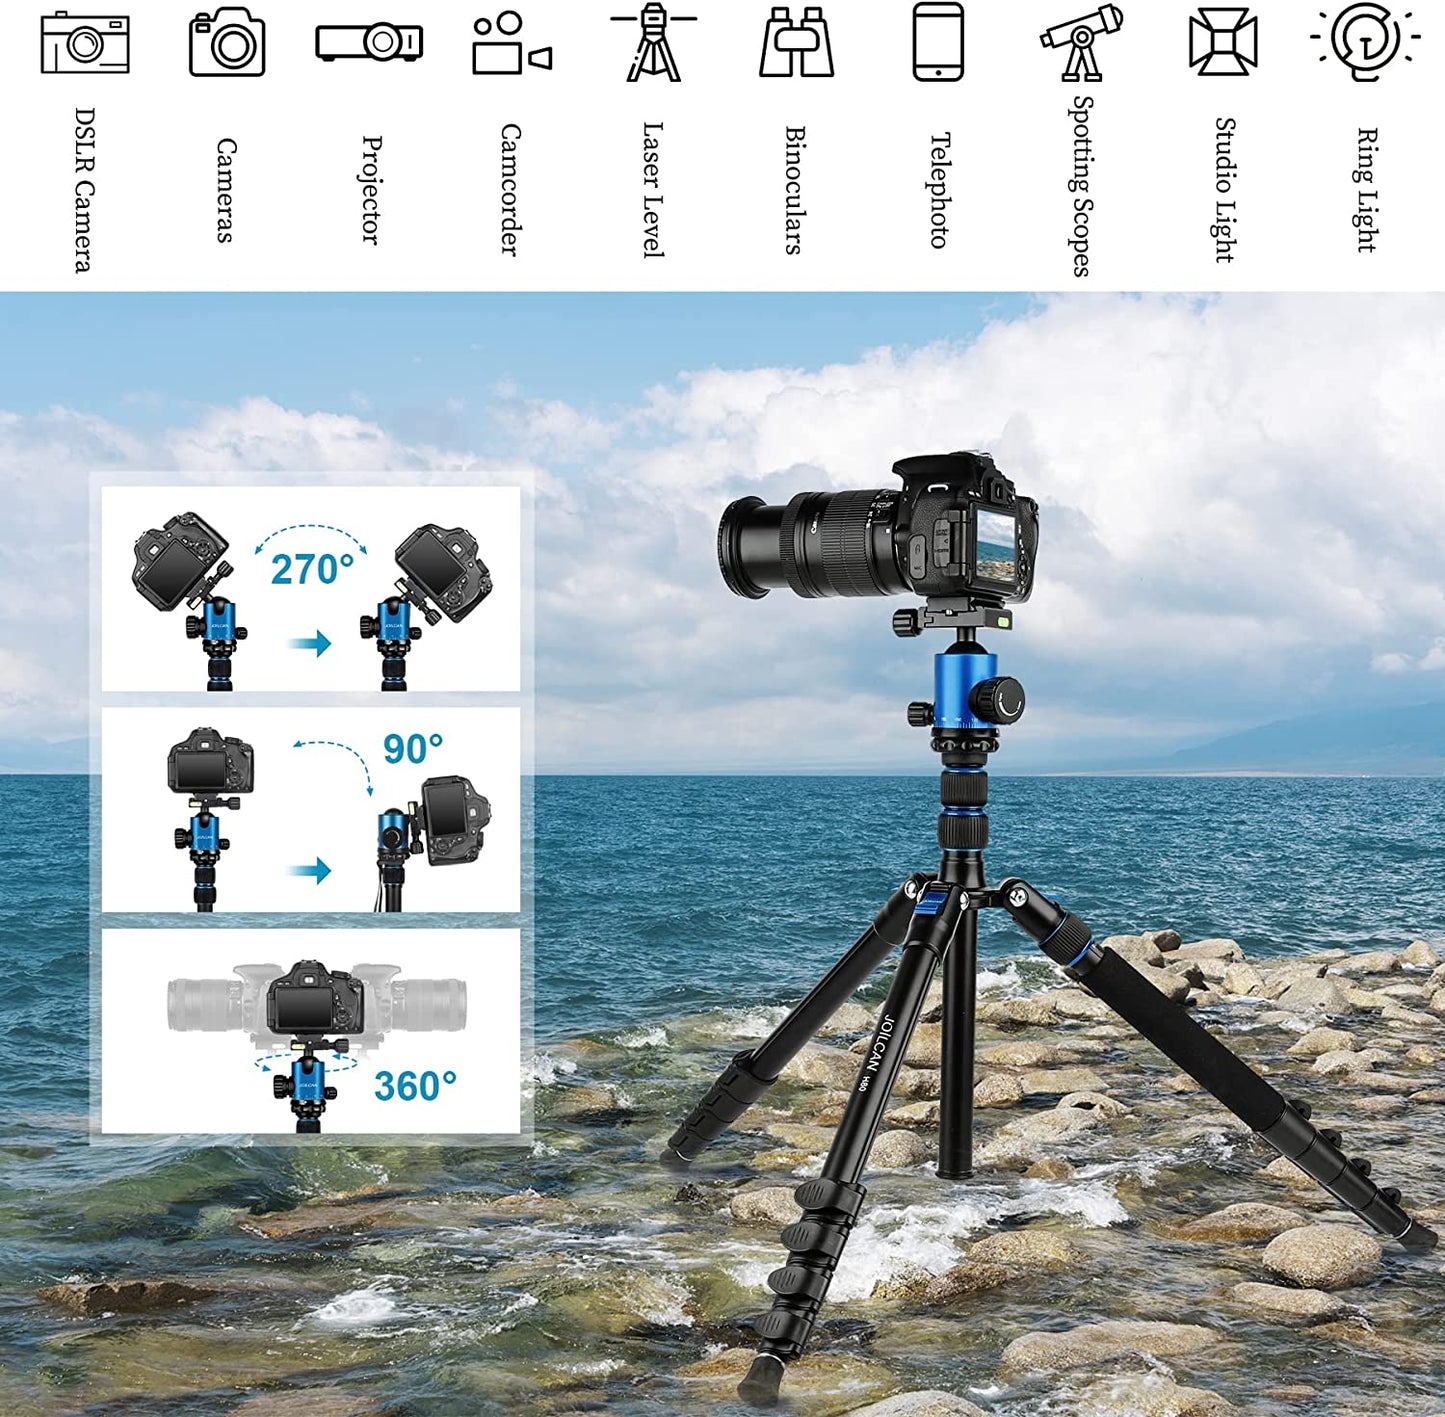 JOILCAN Tripod for Cameras, 81 Inches Tall Compact Camera Tripods & Monopods for DSLR Binoculars Laser Level Projector, Aluminum Heavy Duty Tripod Stand Compatible with Camera Canon Nikon Sony(USA)